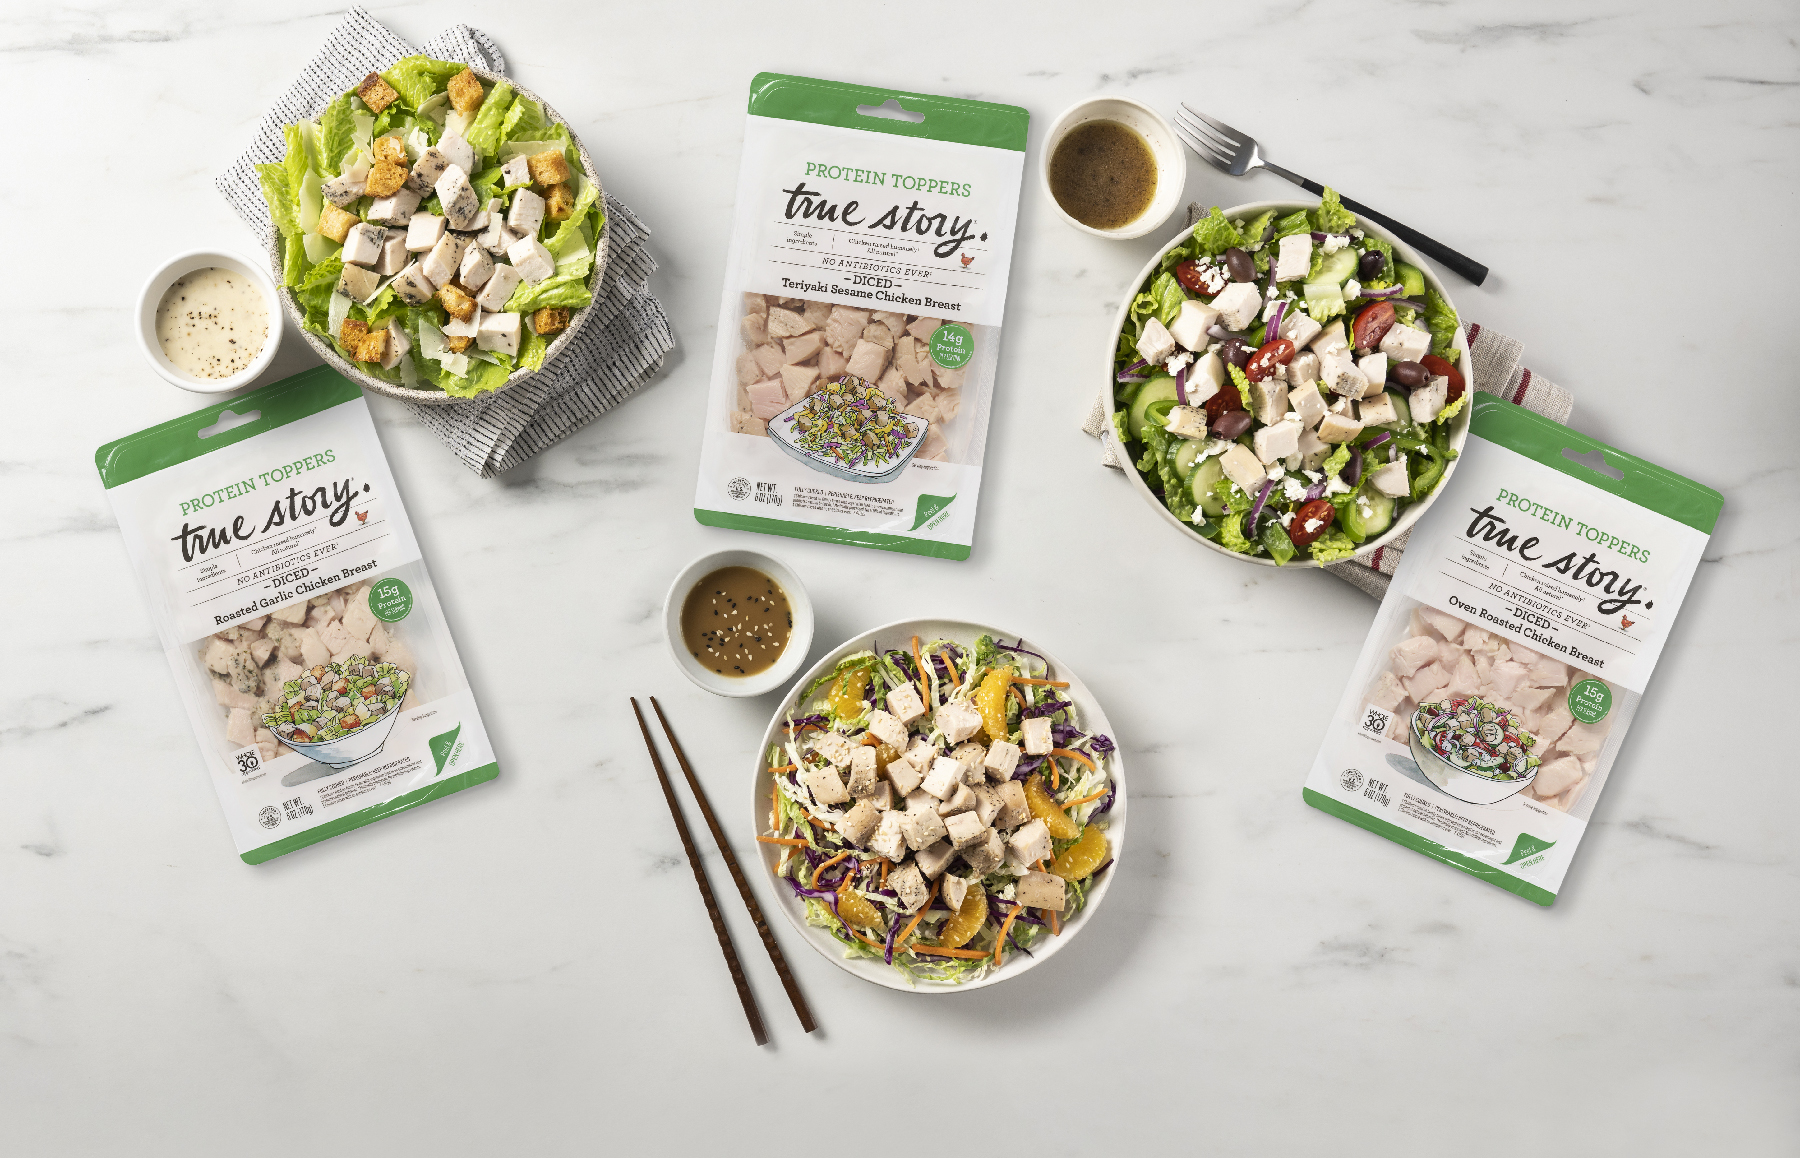 True Story Foods Hits the Produce Section With New ‘Protein Toppers’ Diced Chicken